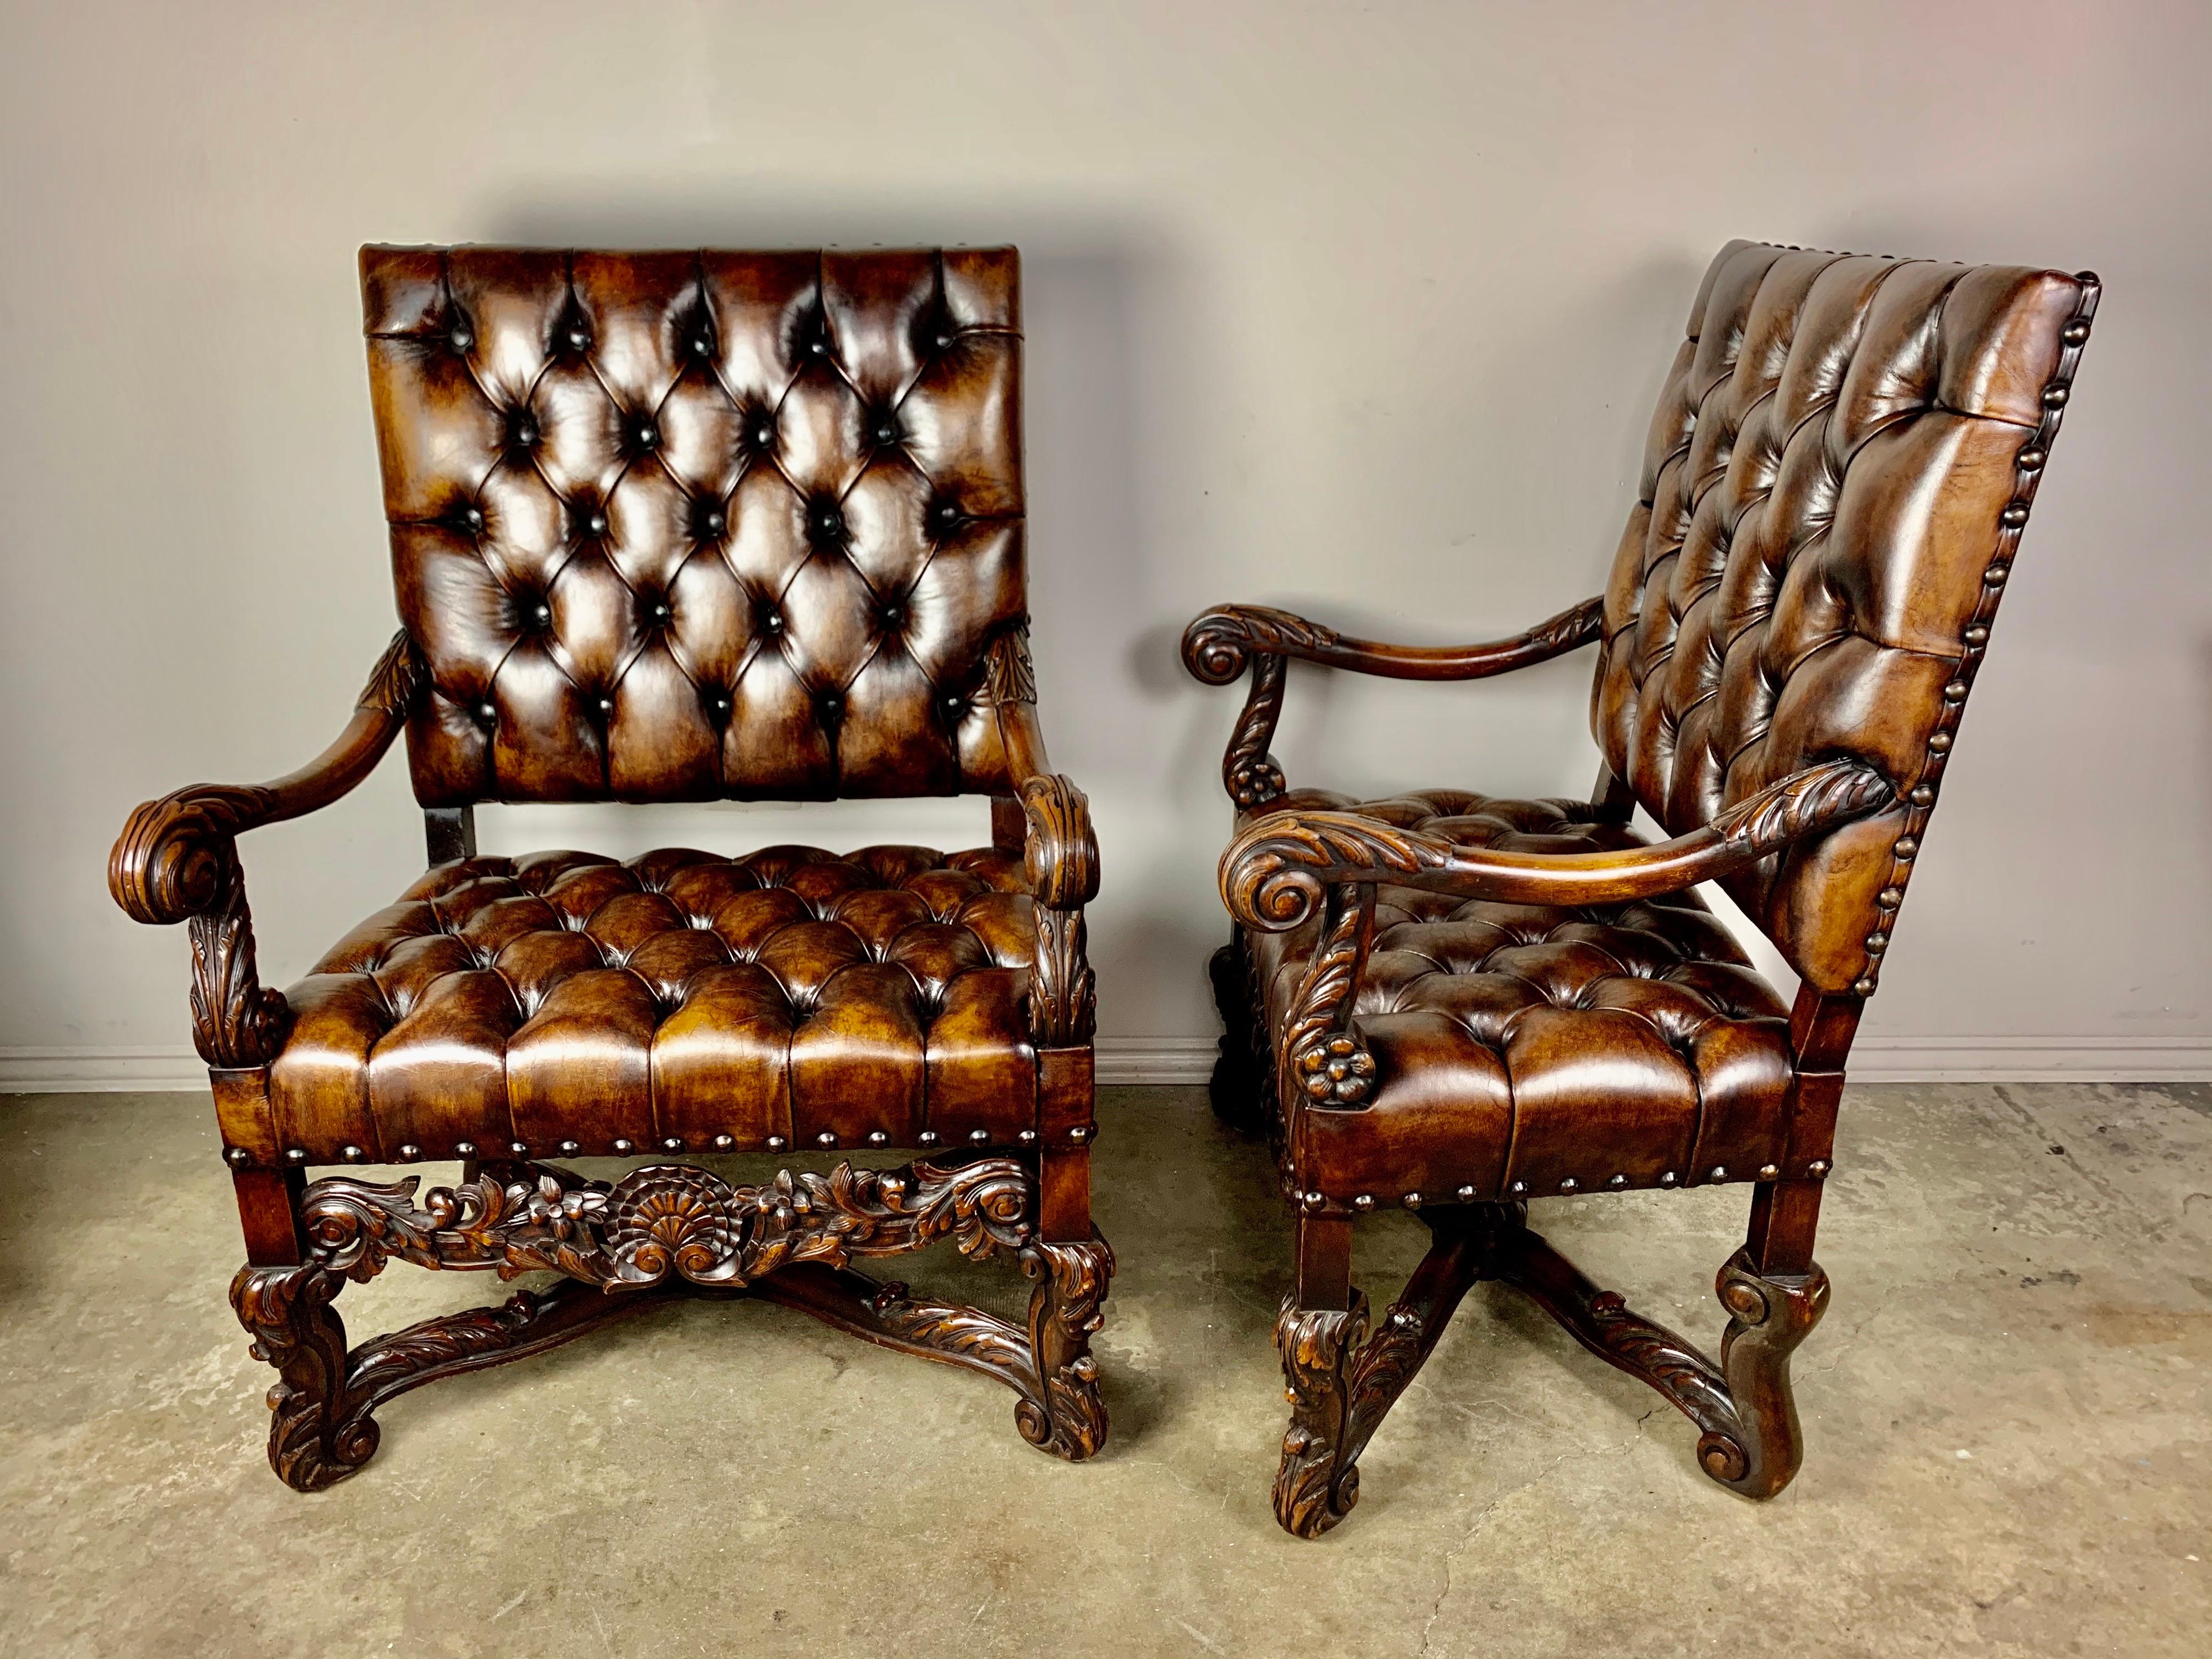 Hand-Carved Pair of 19th Century Italian Carved Leather Tufted Armchairs